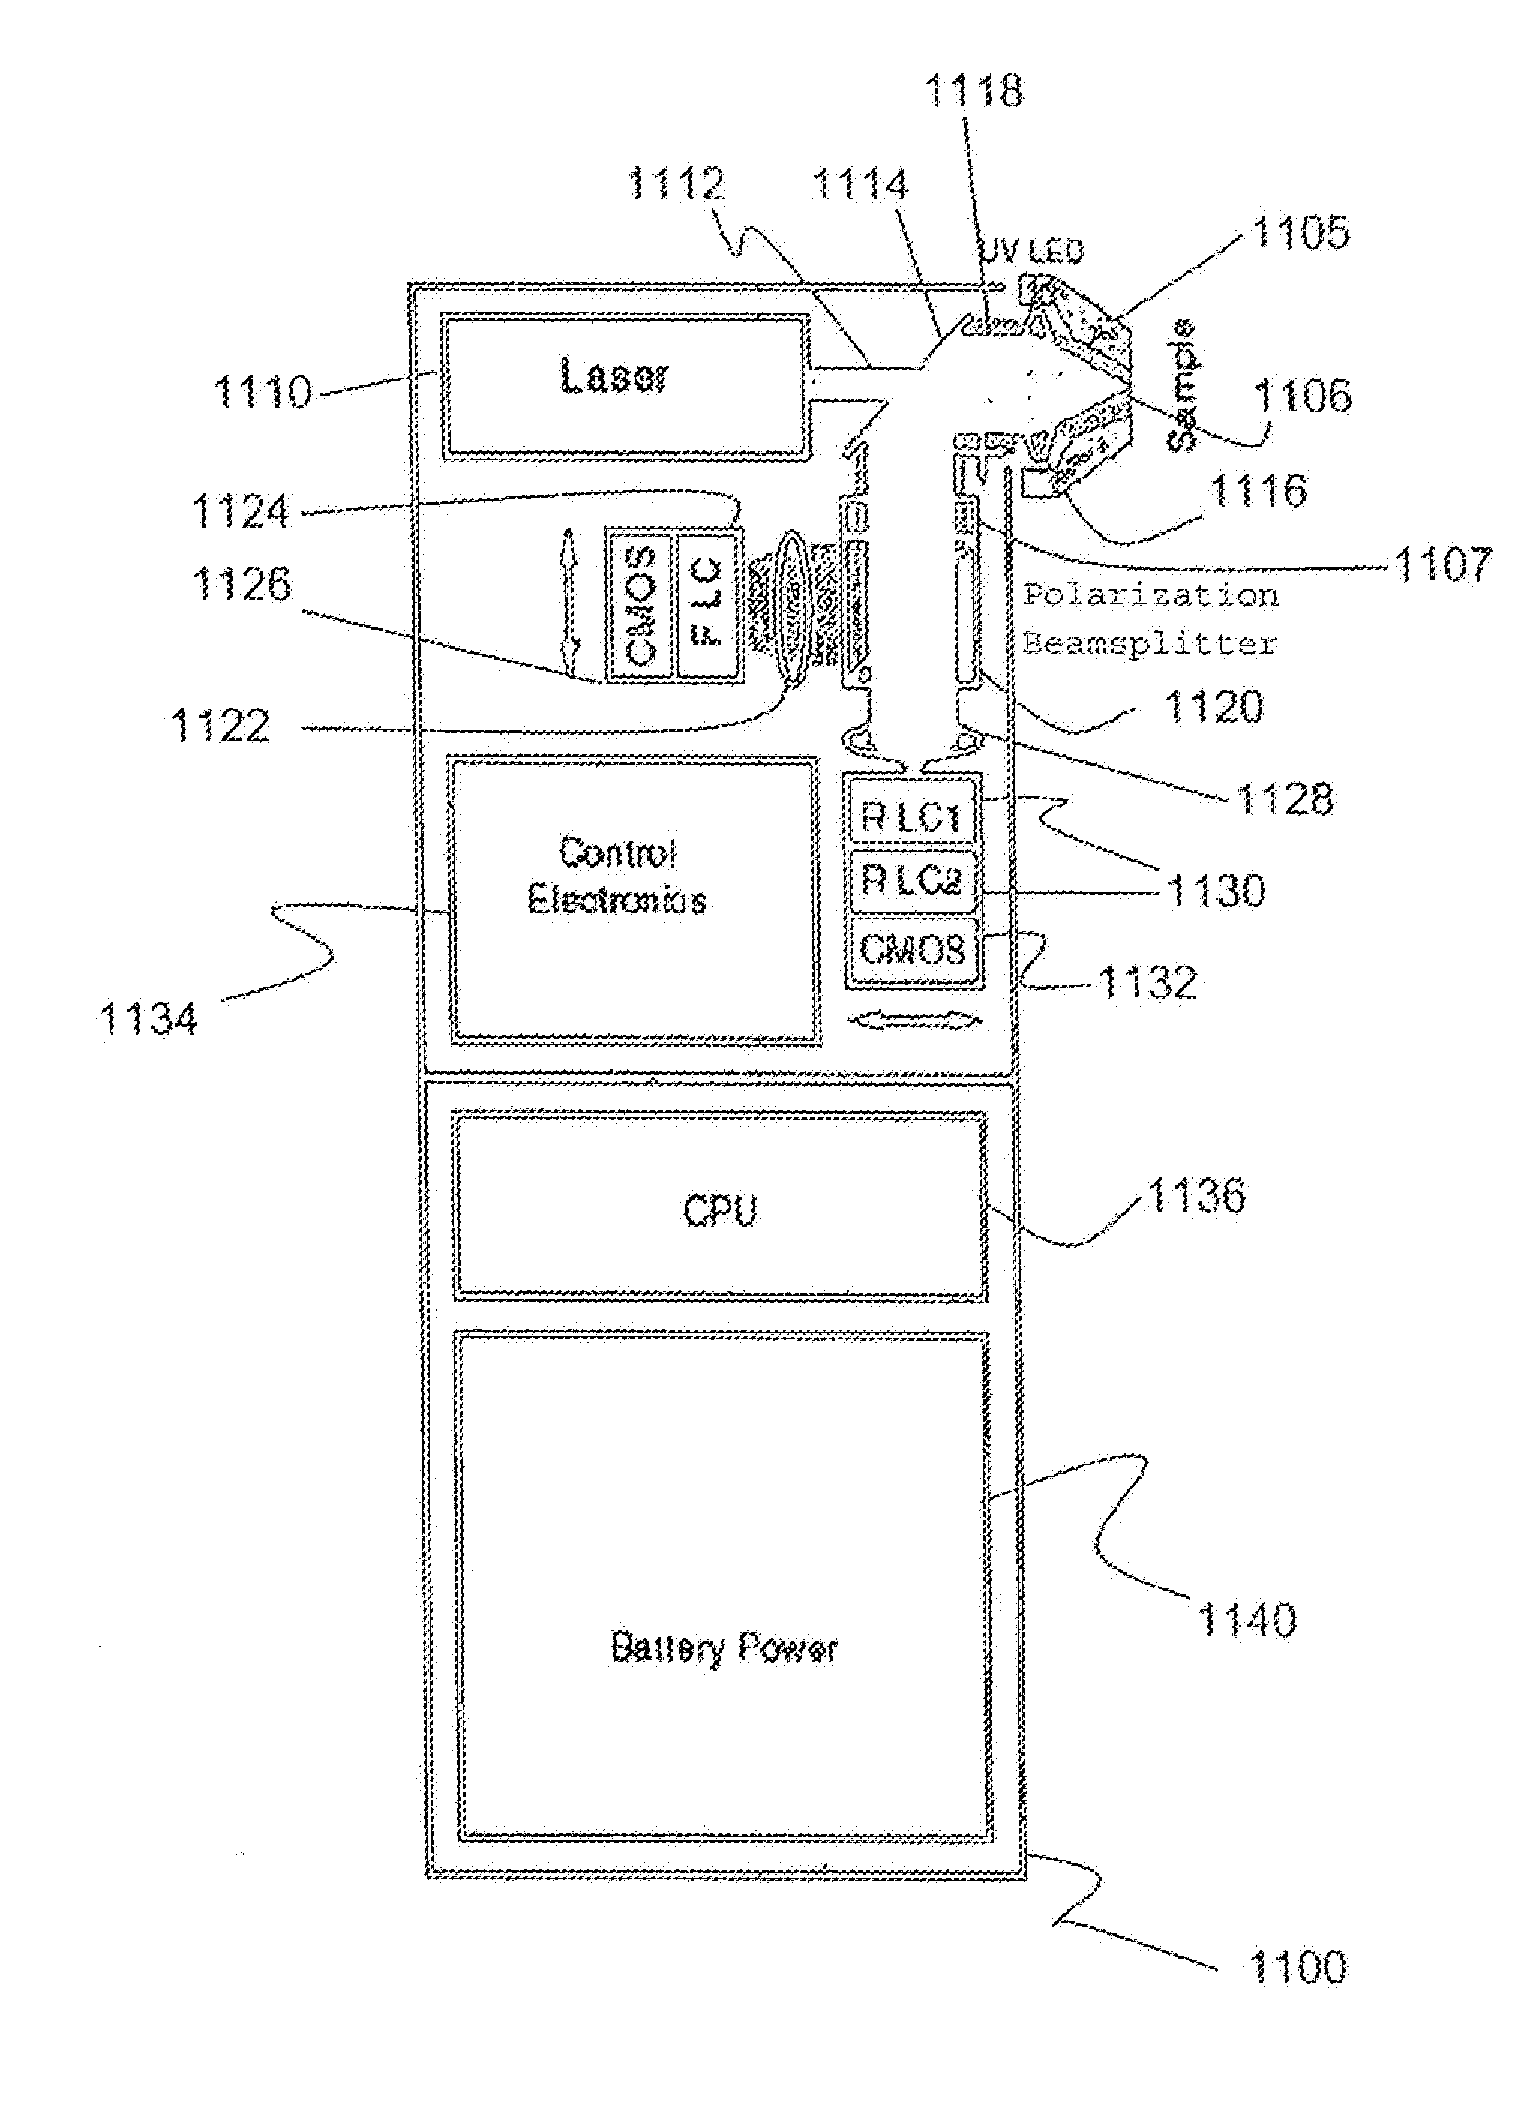 Method and Apparatus for Compact Spectrometer for Multipoint Sampling of an Object